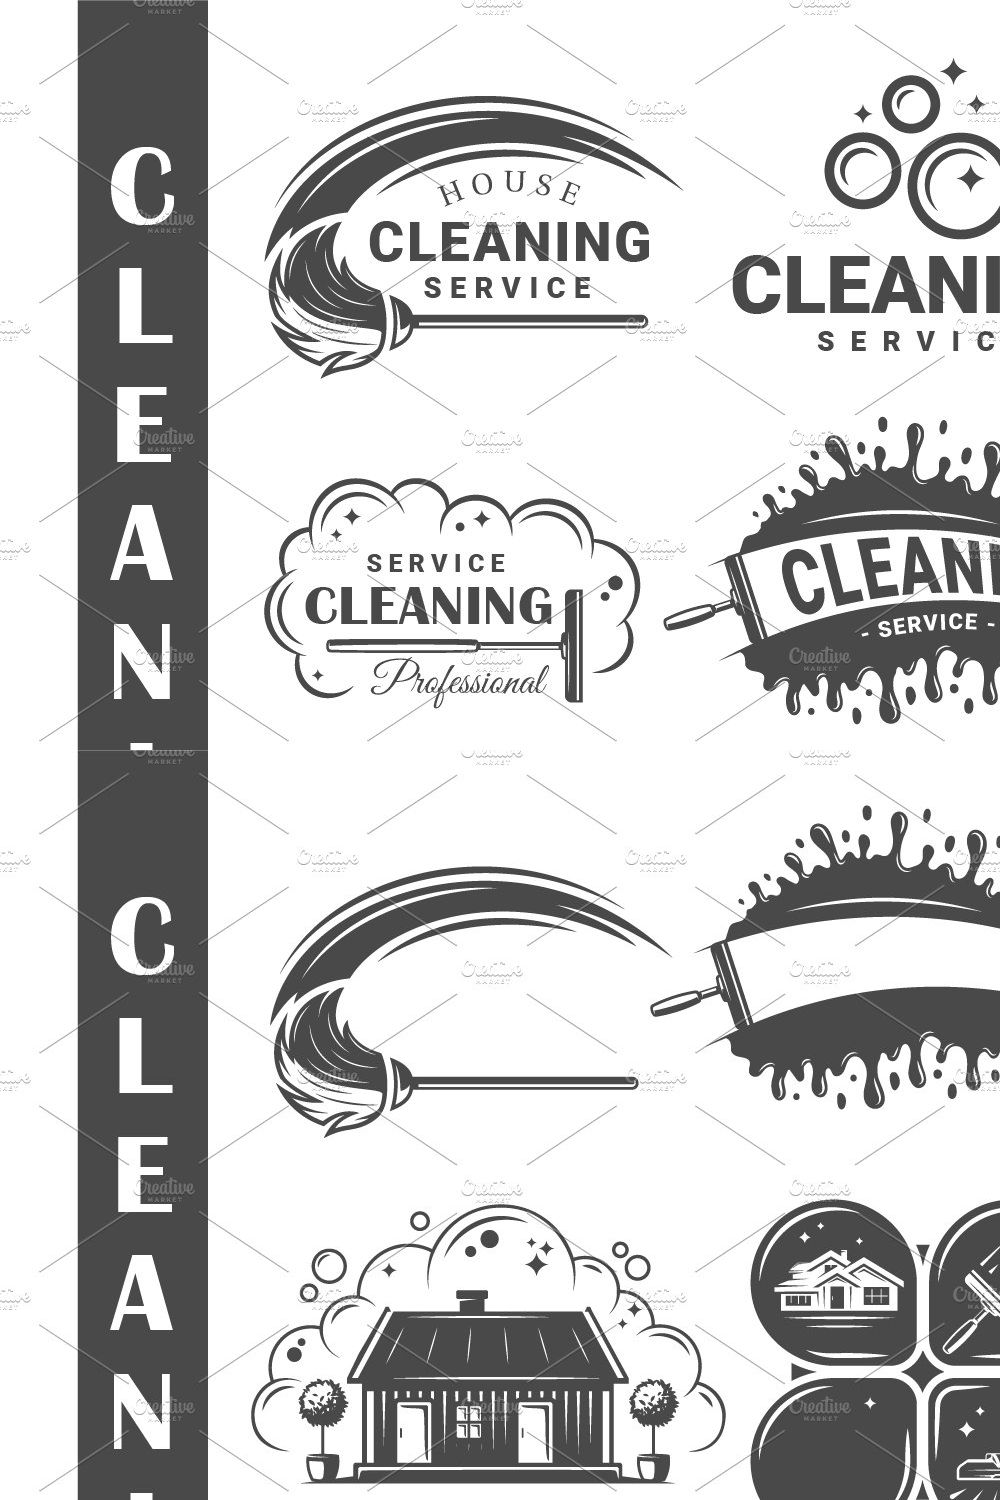 9 Cleaner Service Logos Templates 2 pinterest preview image.